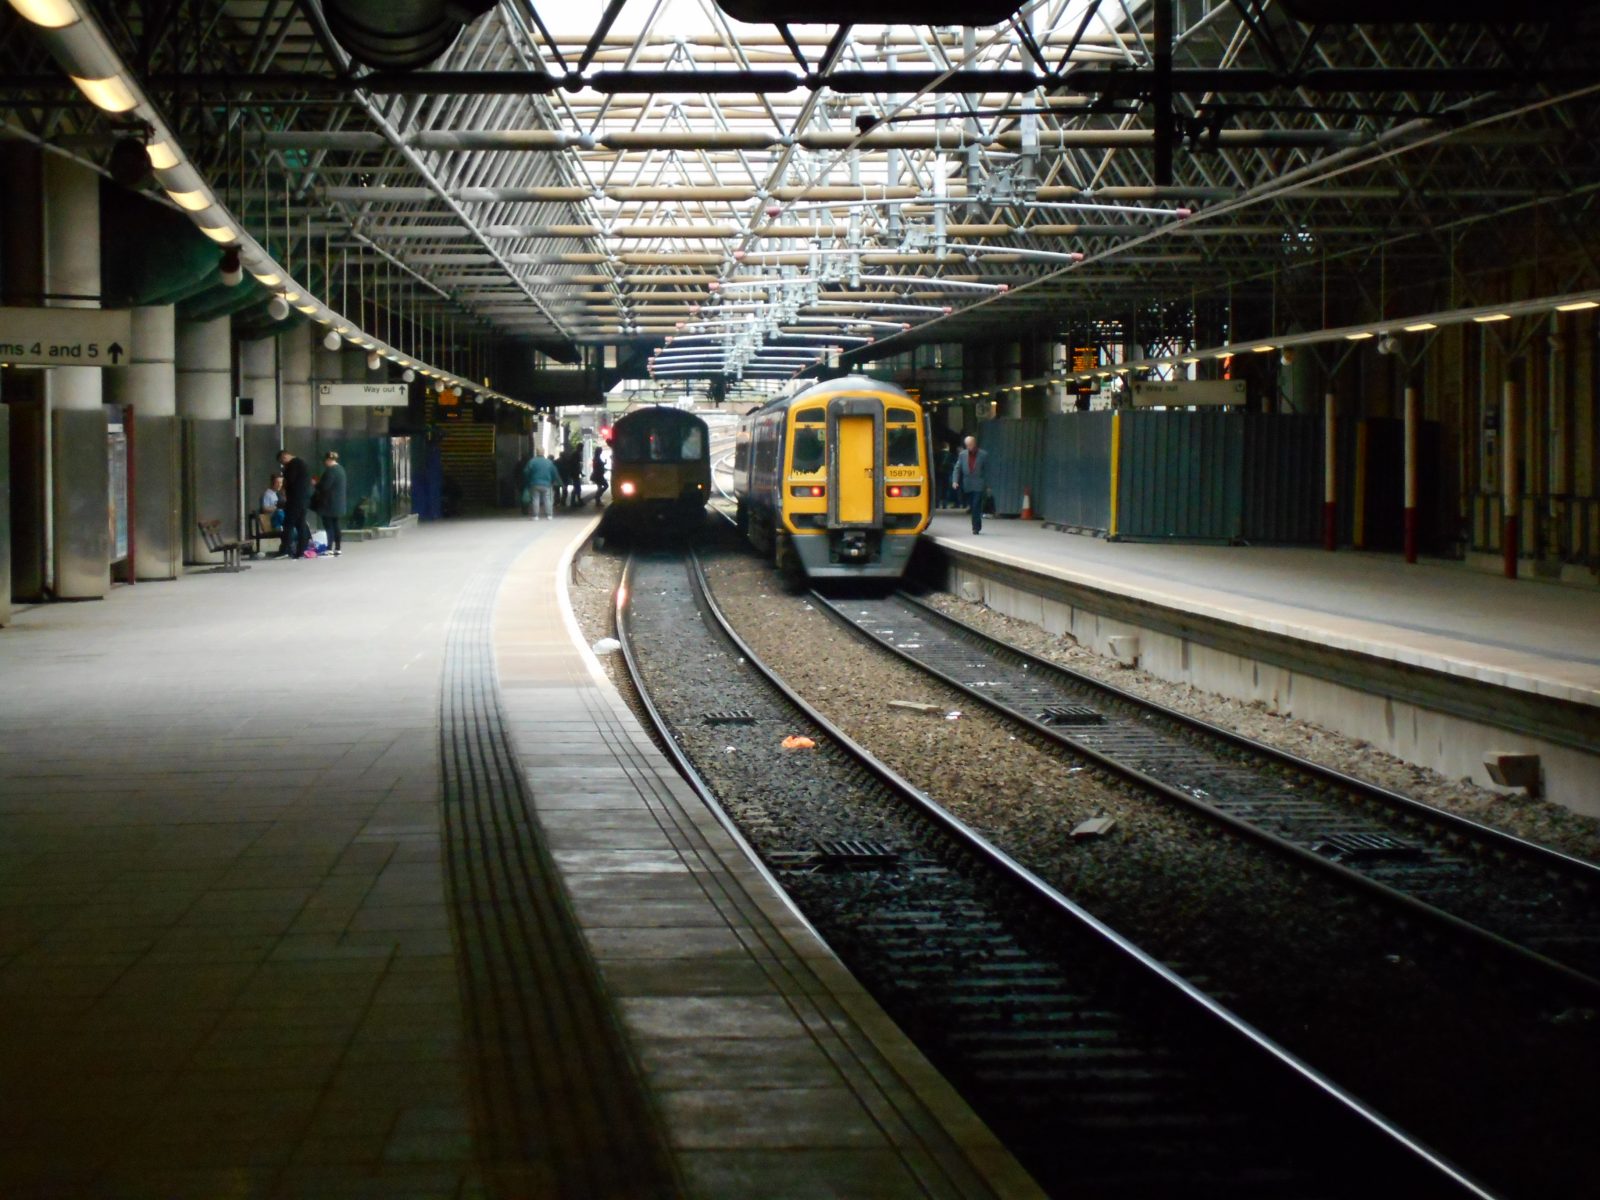 &#8216;We have one shot at this and we can’t afford to get it wrong&#8217; &#8211; why Manchester deserves an underground train network, The Manc